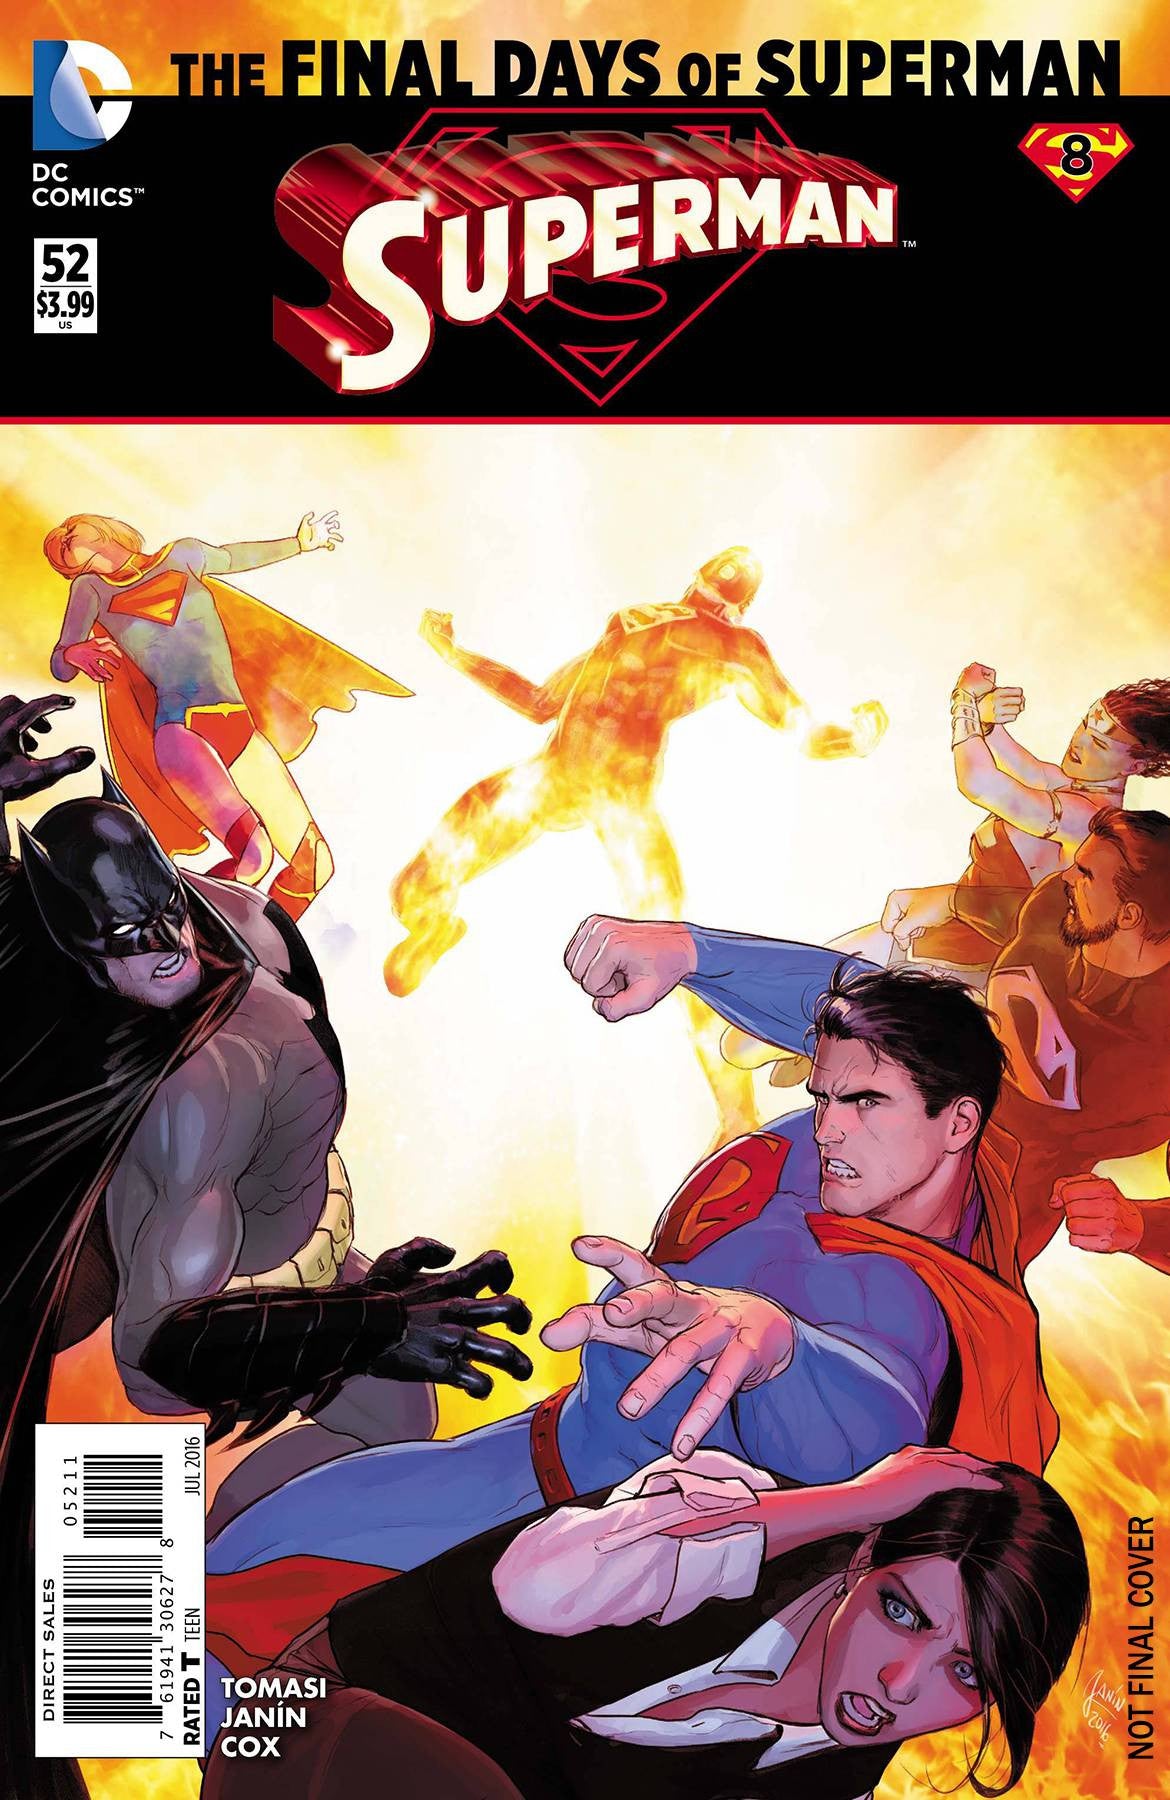 SUPERMAN #52 2ND PTG (FINAL DAYS) COVER